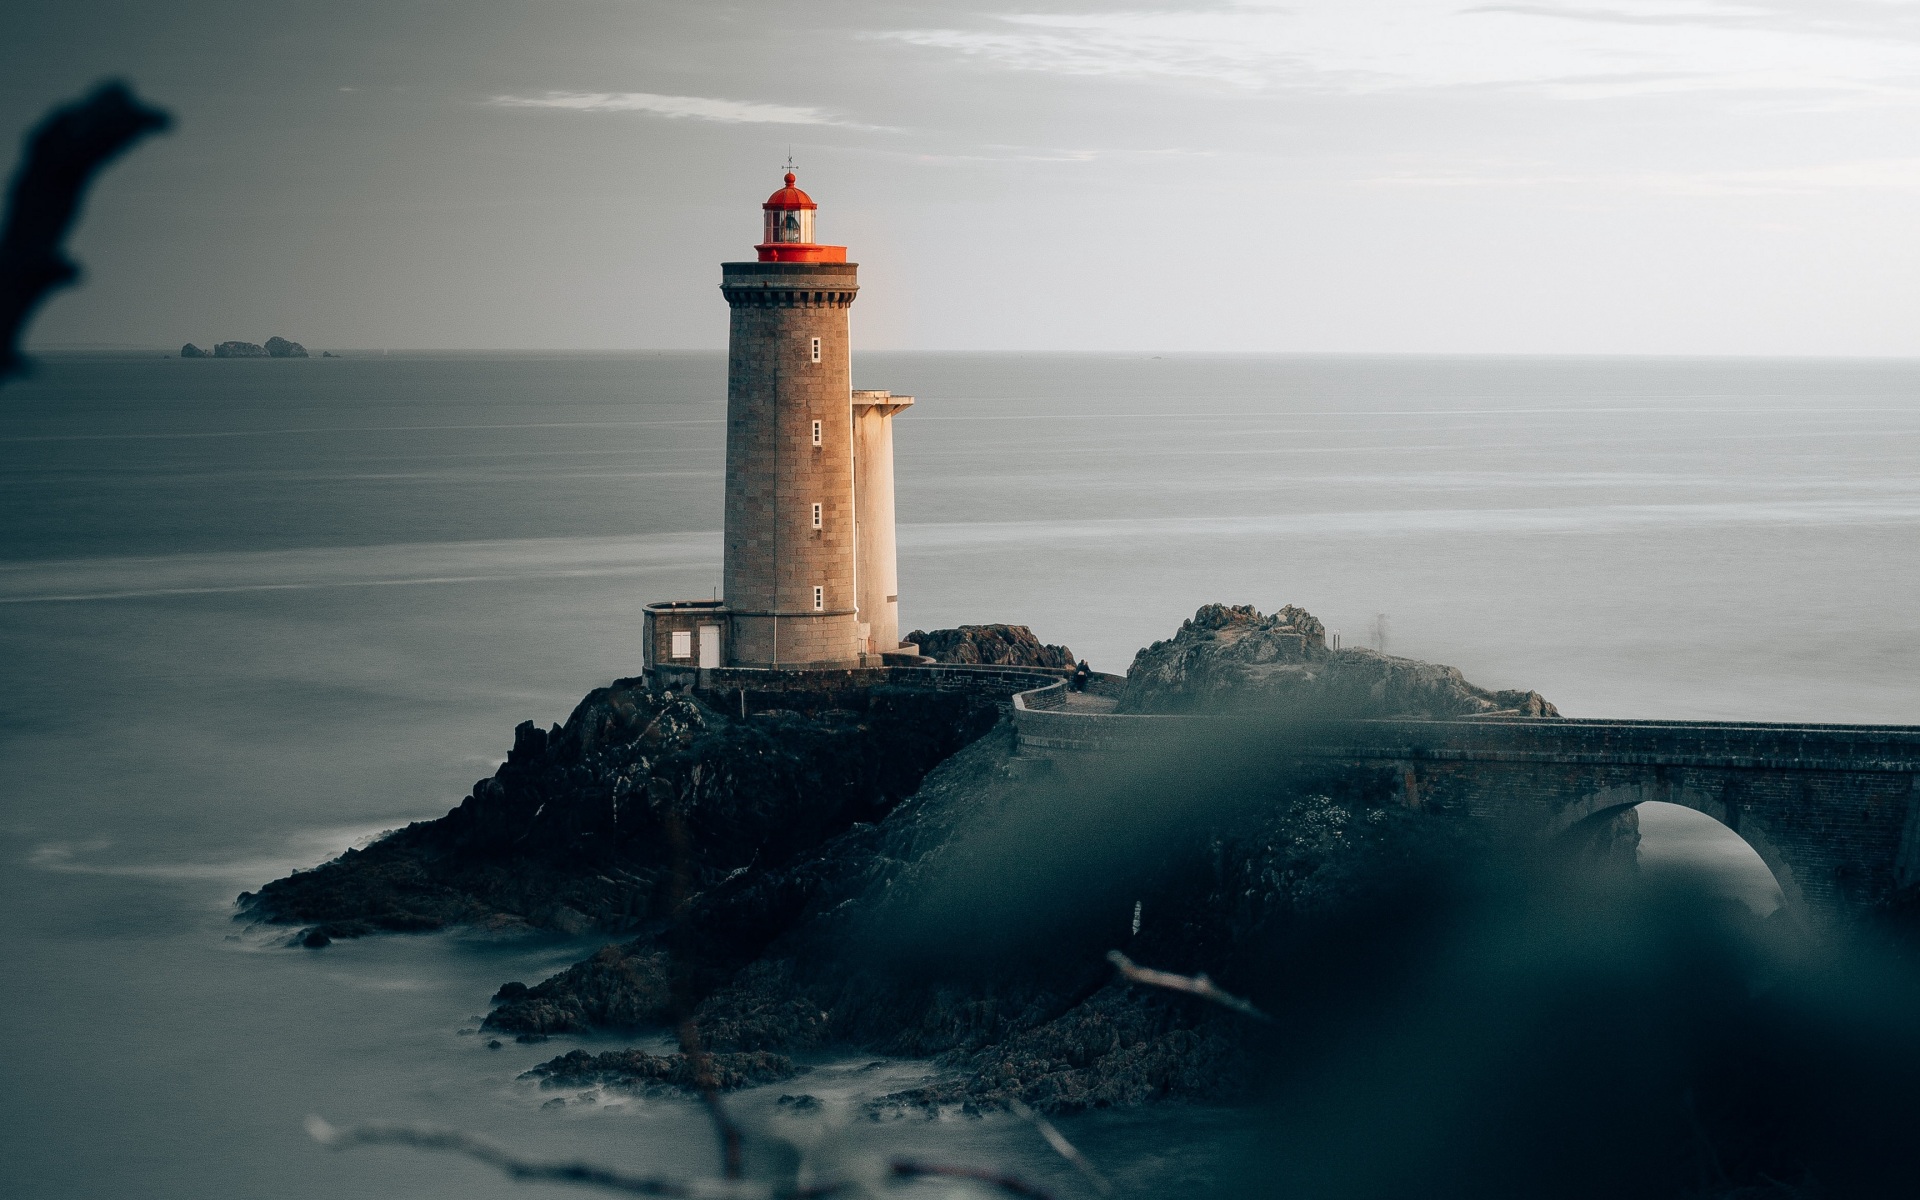 Lighthouse 4K Cool Wallpapers